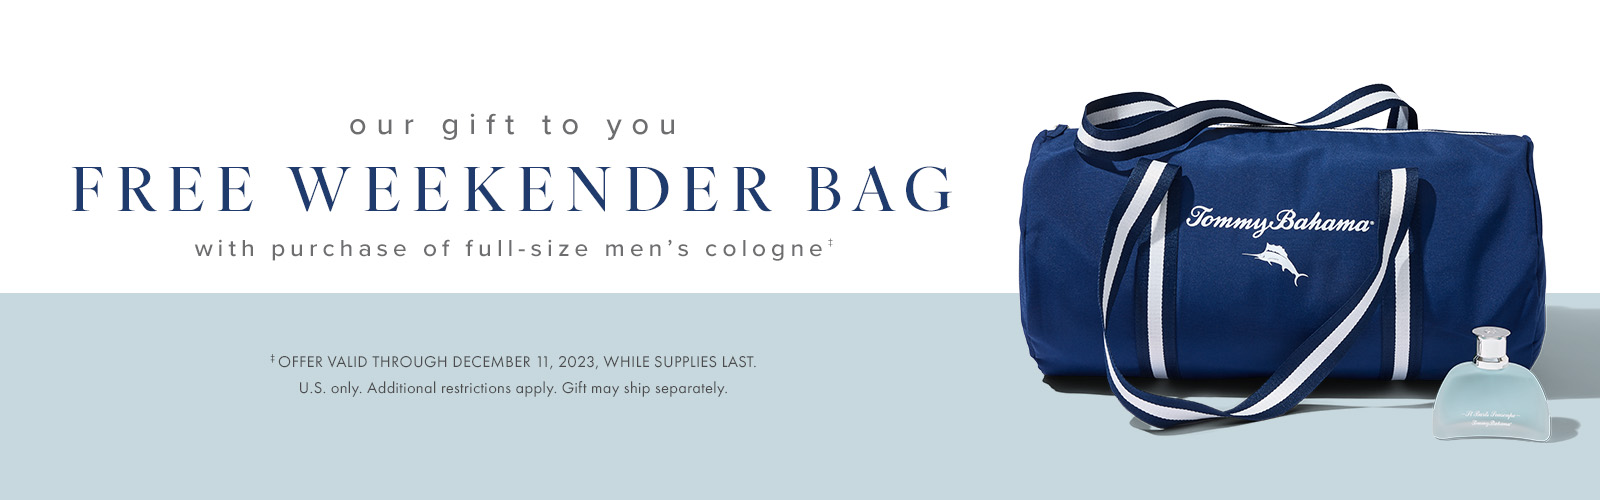 FREE WEEKENDER BAG with purchase of a full-size men's fragrance